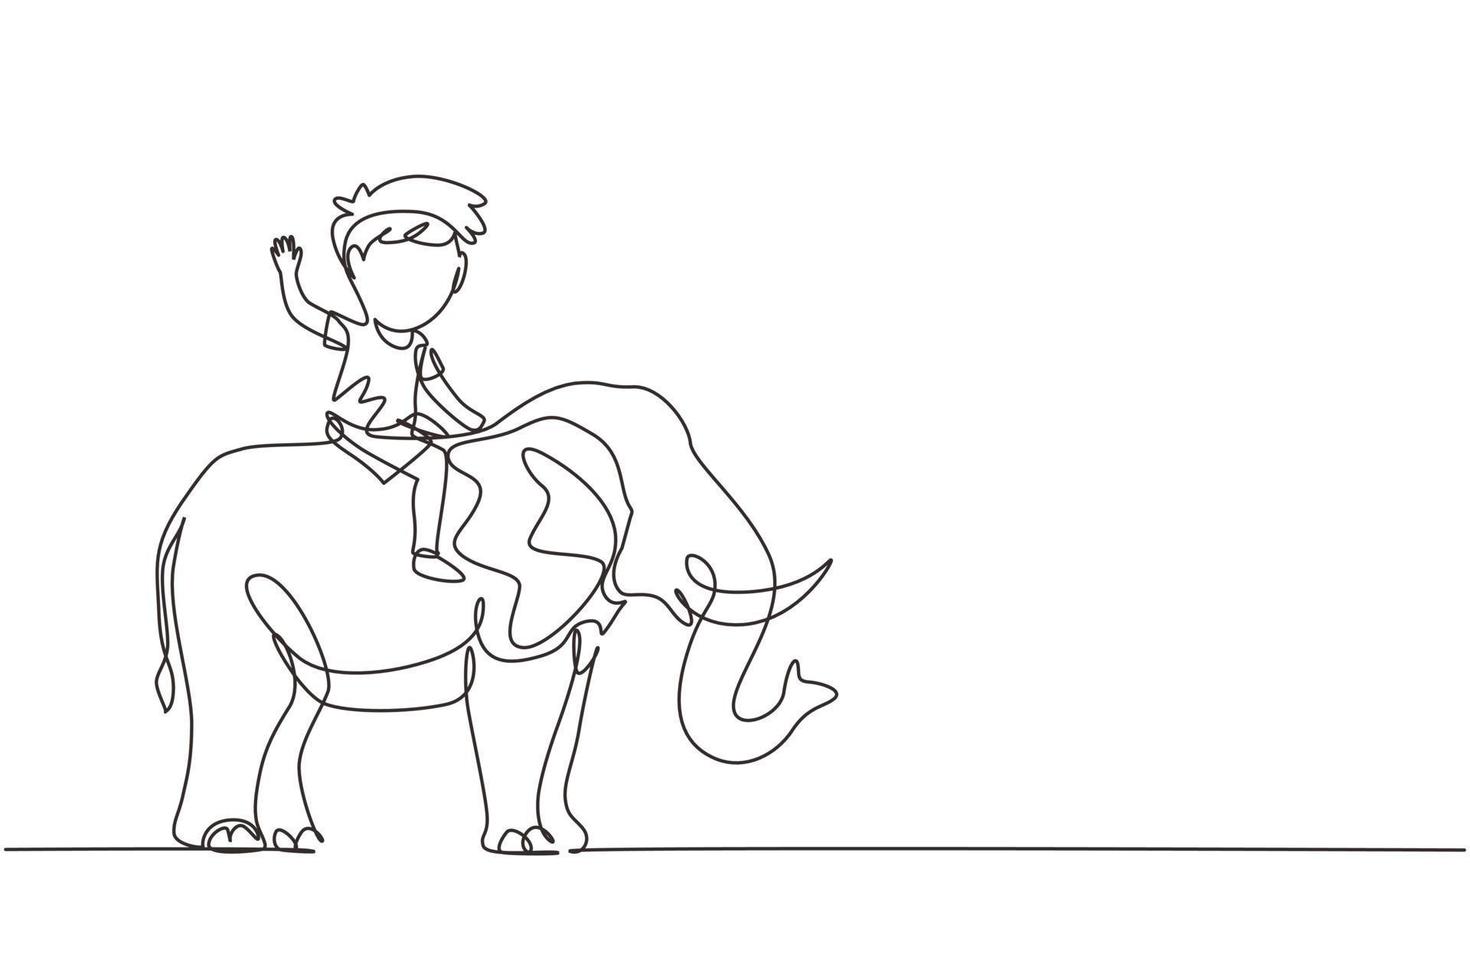 Single one line drawing happy little boy riding elephant. Child sitting on back elephant and travelling. Kids learning to ride elephant. Modern continuous line draw design graphic vector illustration